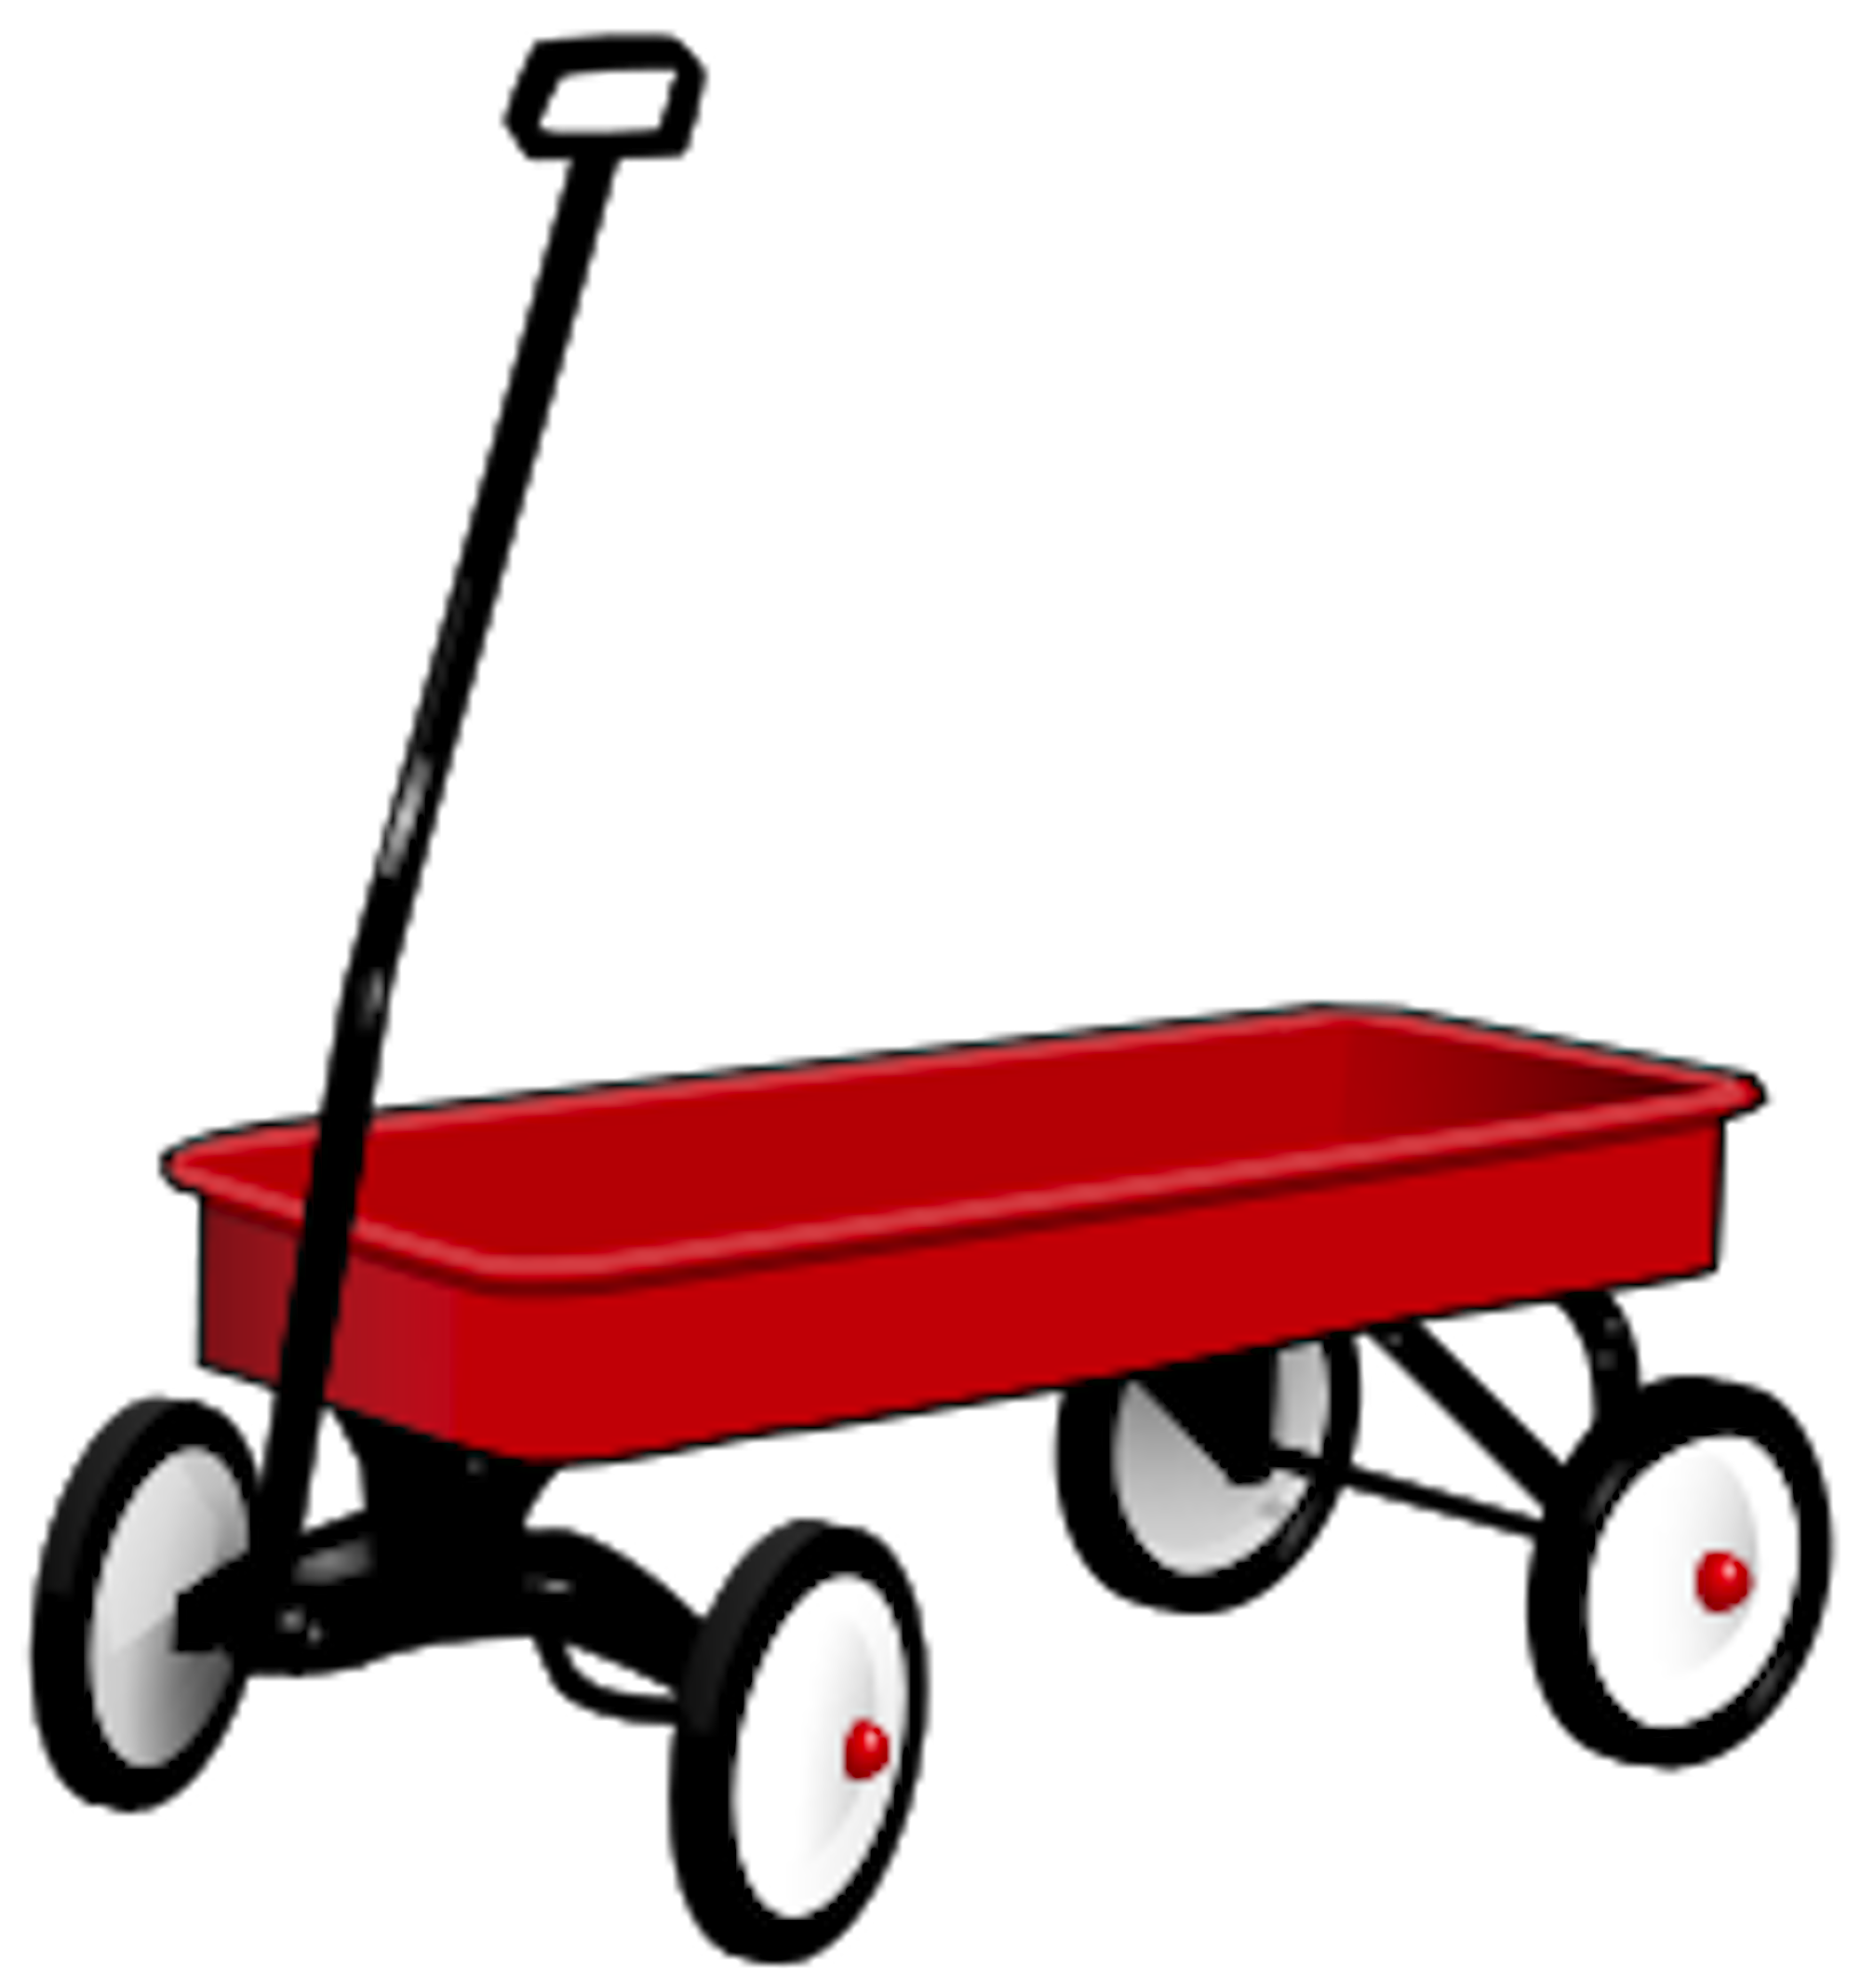 ... Red Wagon Pictures - Clip - Wagon Clip Art